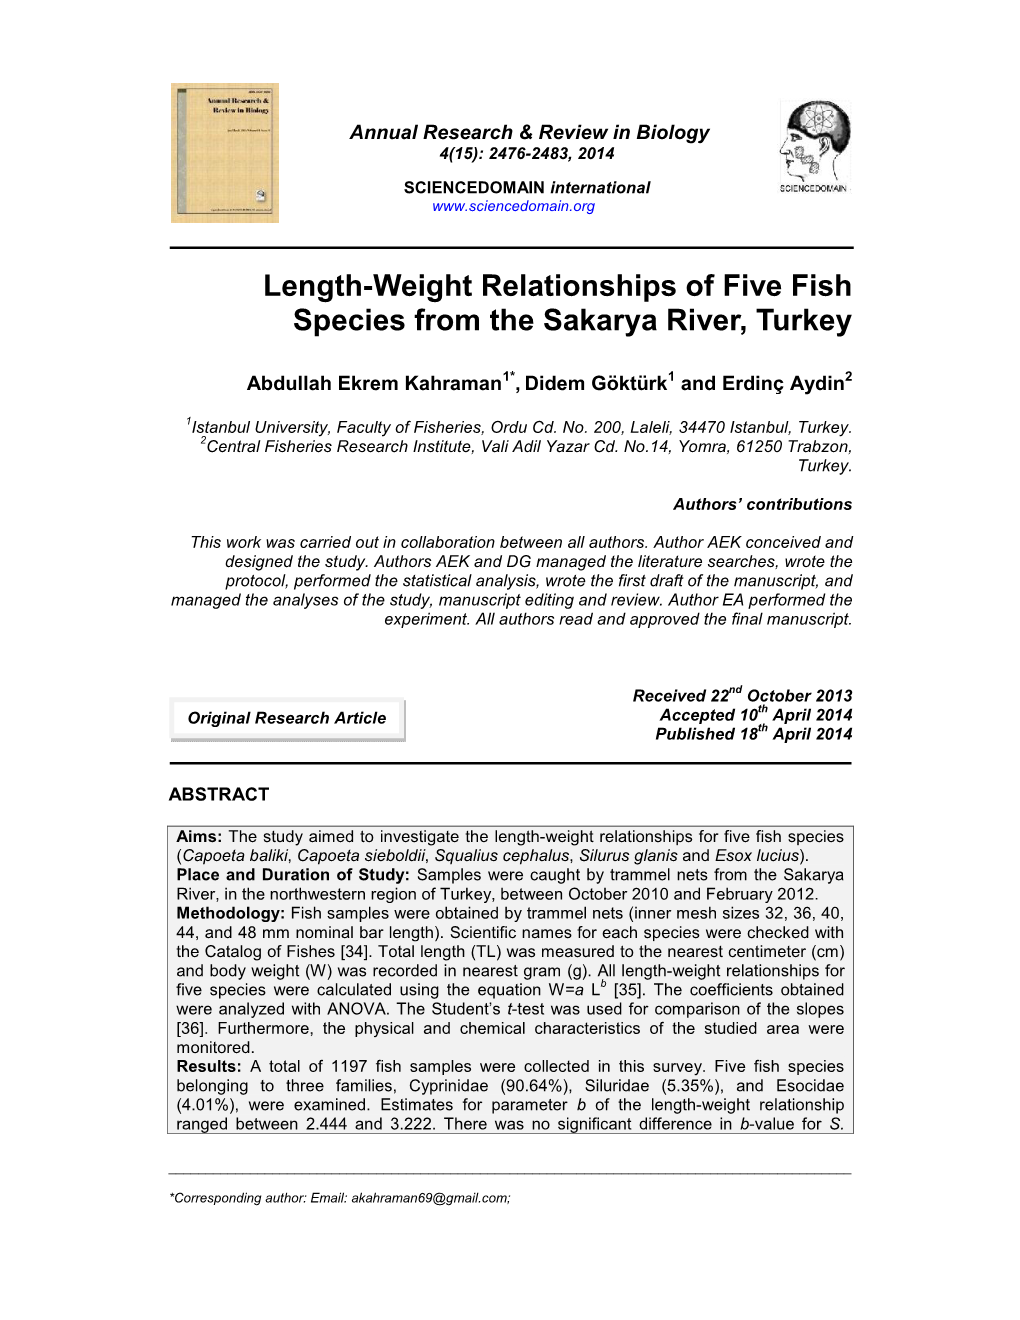 Length-Weight Relationships of Five Fish Species from the Sakarya River, Turkey